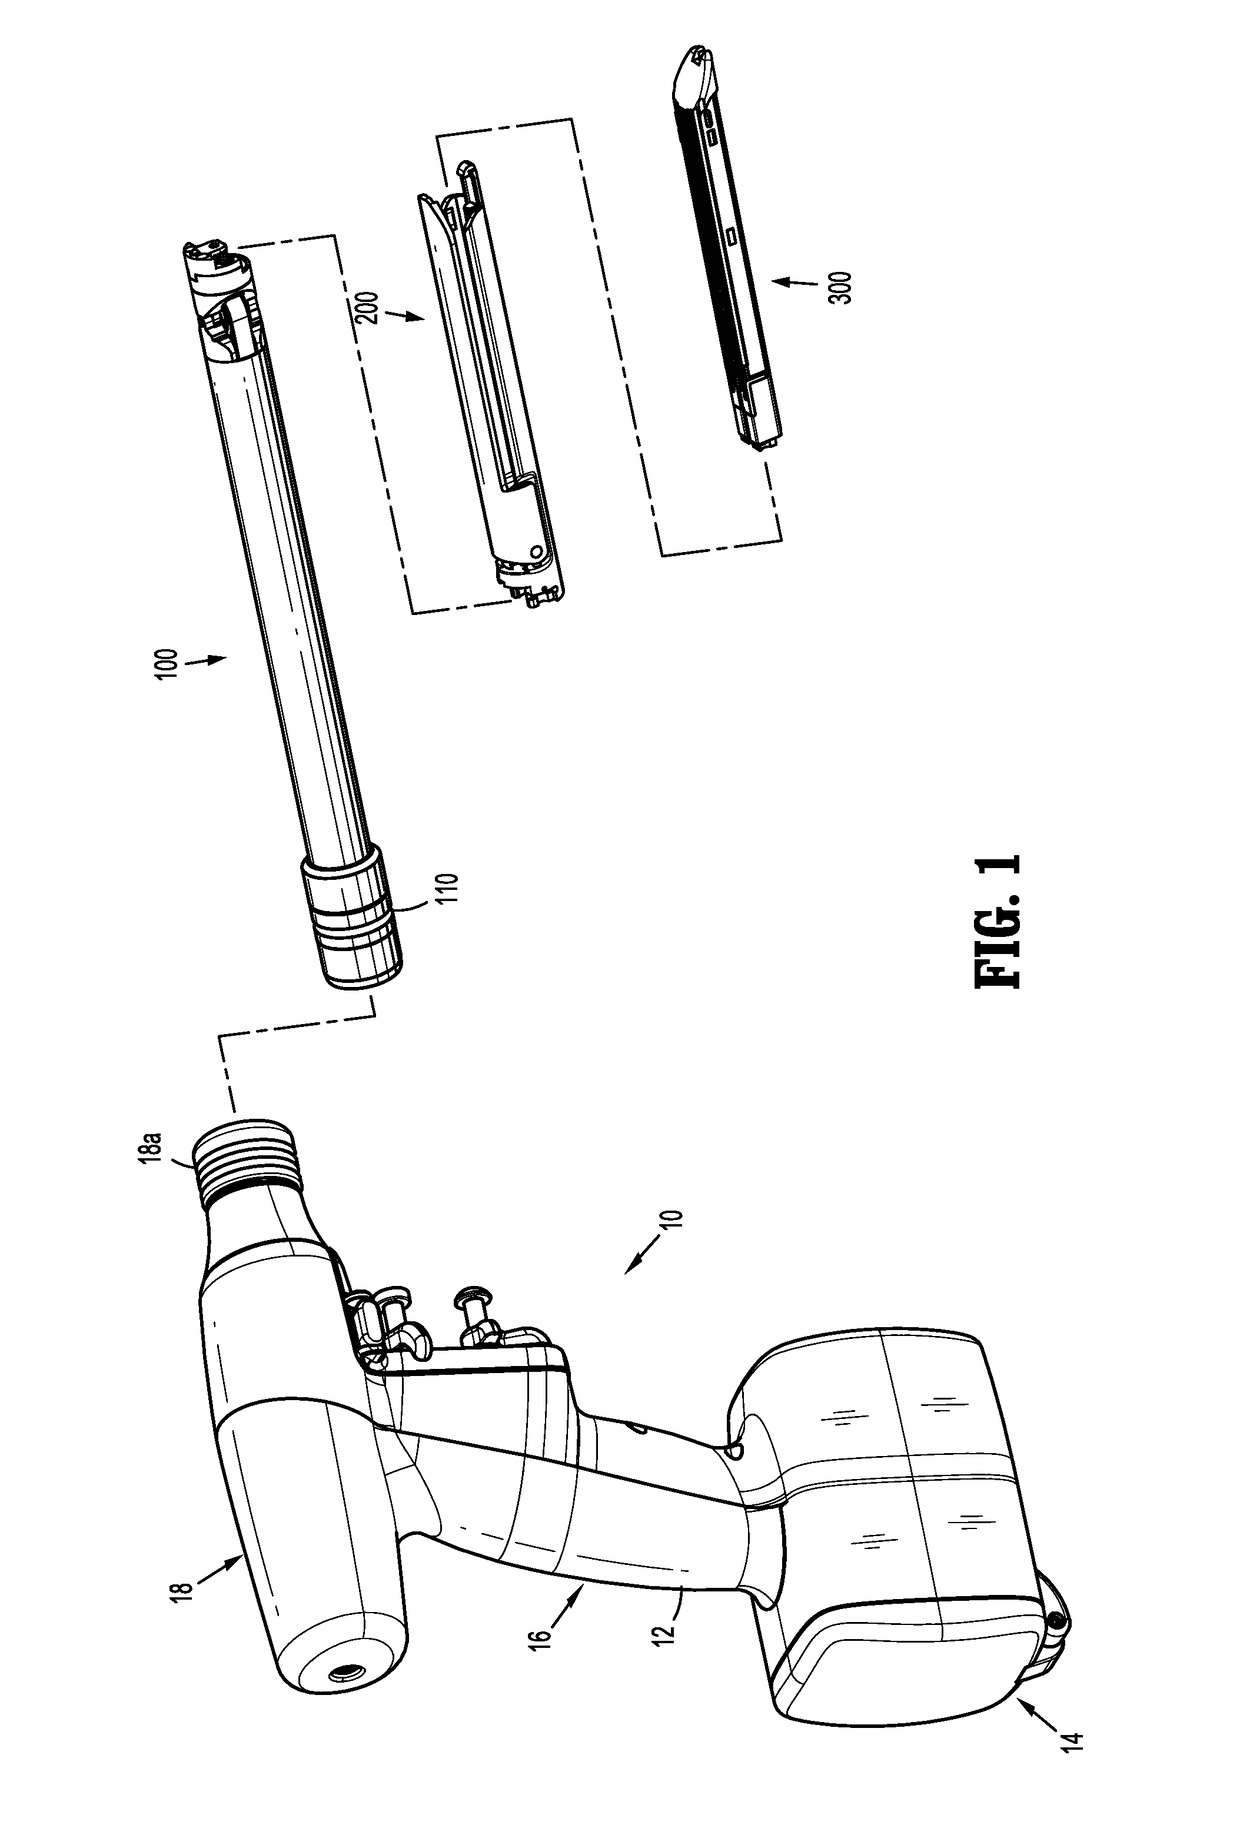 Adapter assembly and loading units for surgical stapling devices